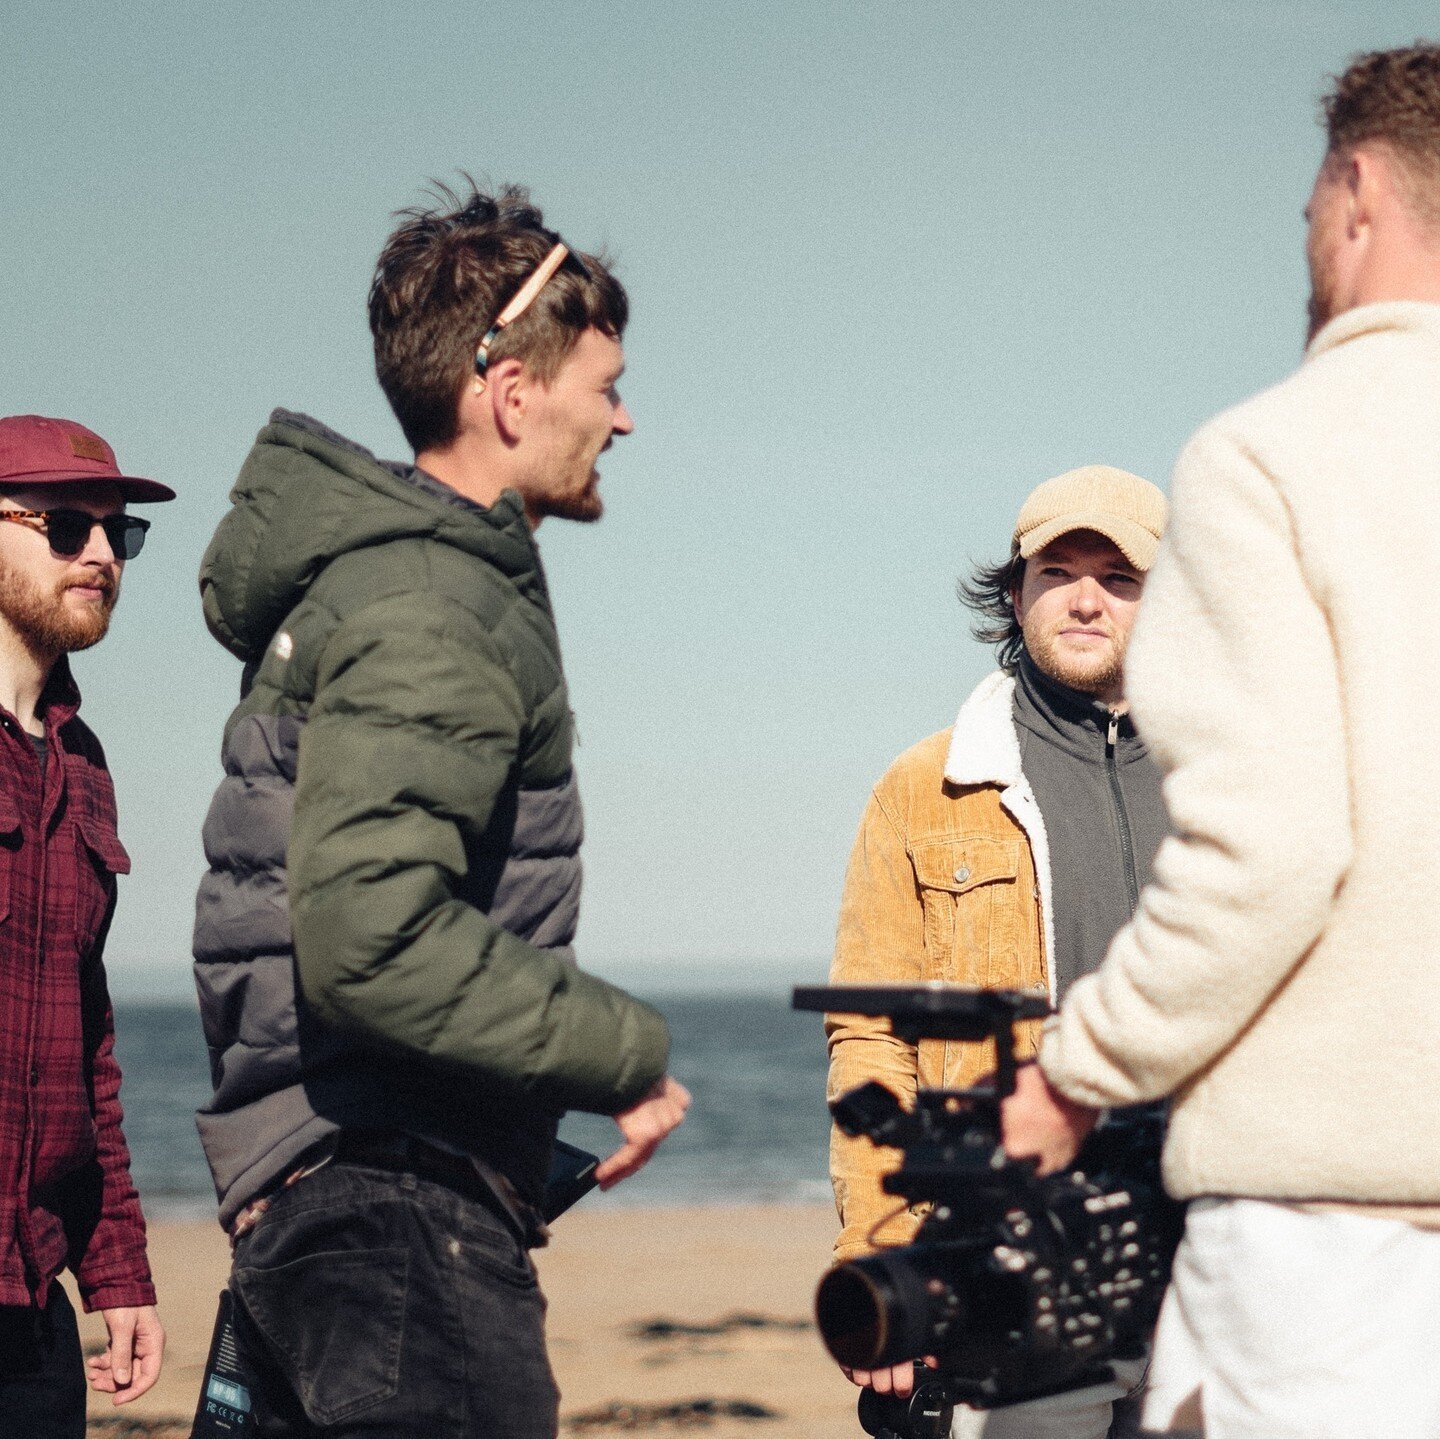 When these boys put their heads together no problem is left unsolved.⁠
⁠
Filmmaking can often be quite a solitary career but we have been fortunate to work on projects recently with a strong team behind us. It's great to see how a film can benefit fr